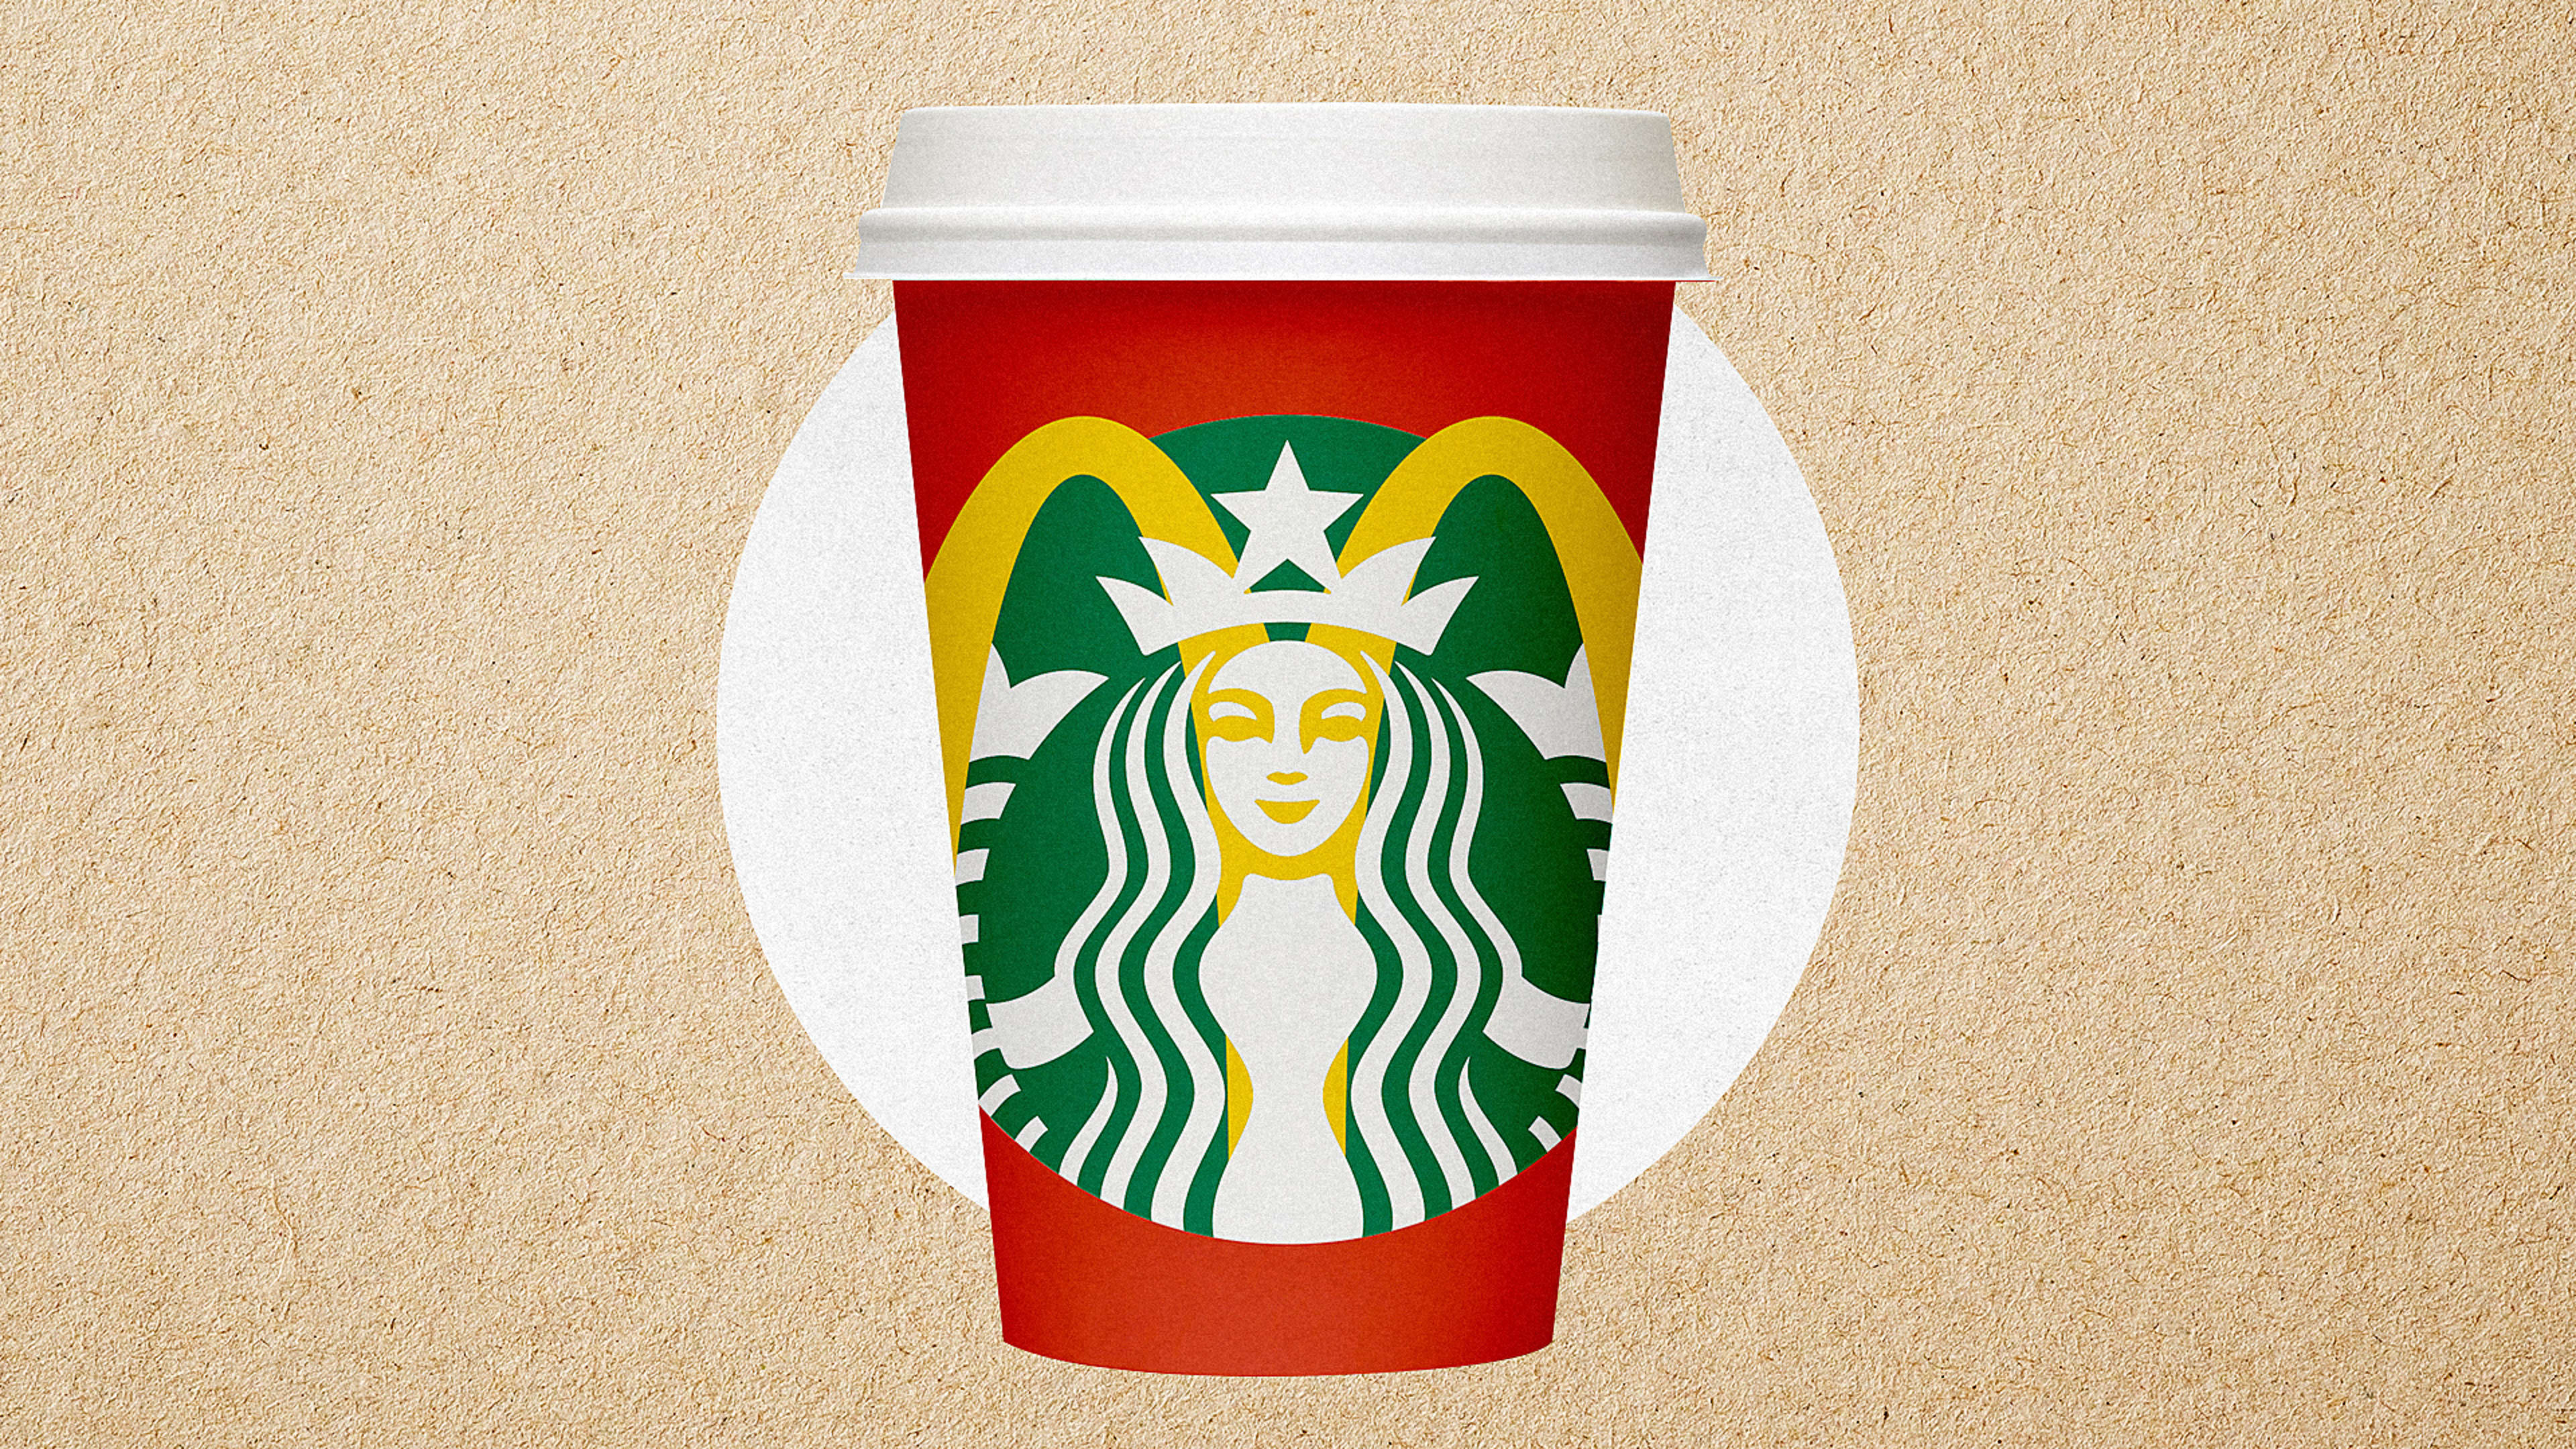 Exclusive: Starbucks and McDonald’s team up to rethink cups